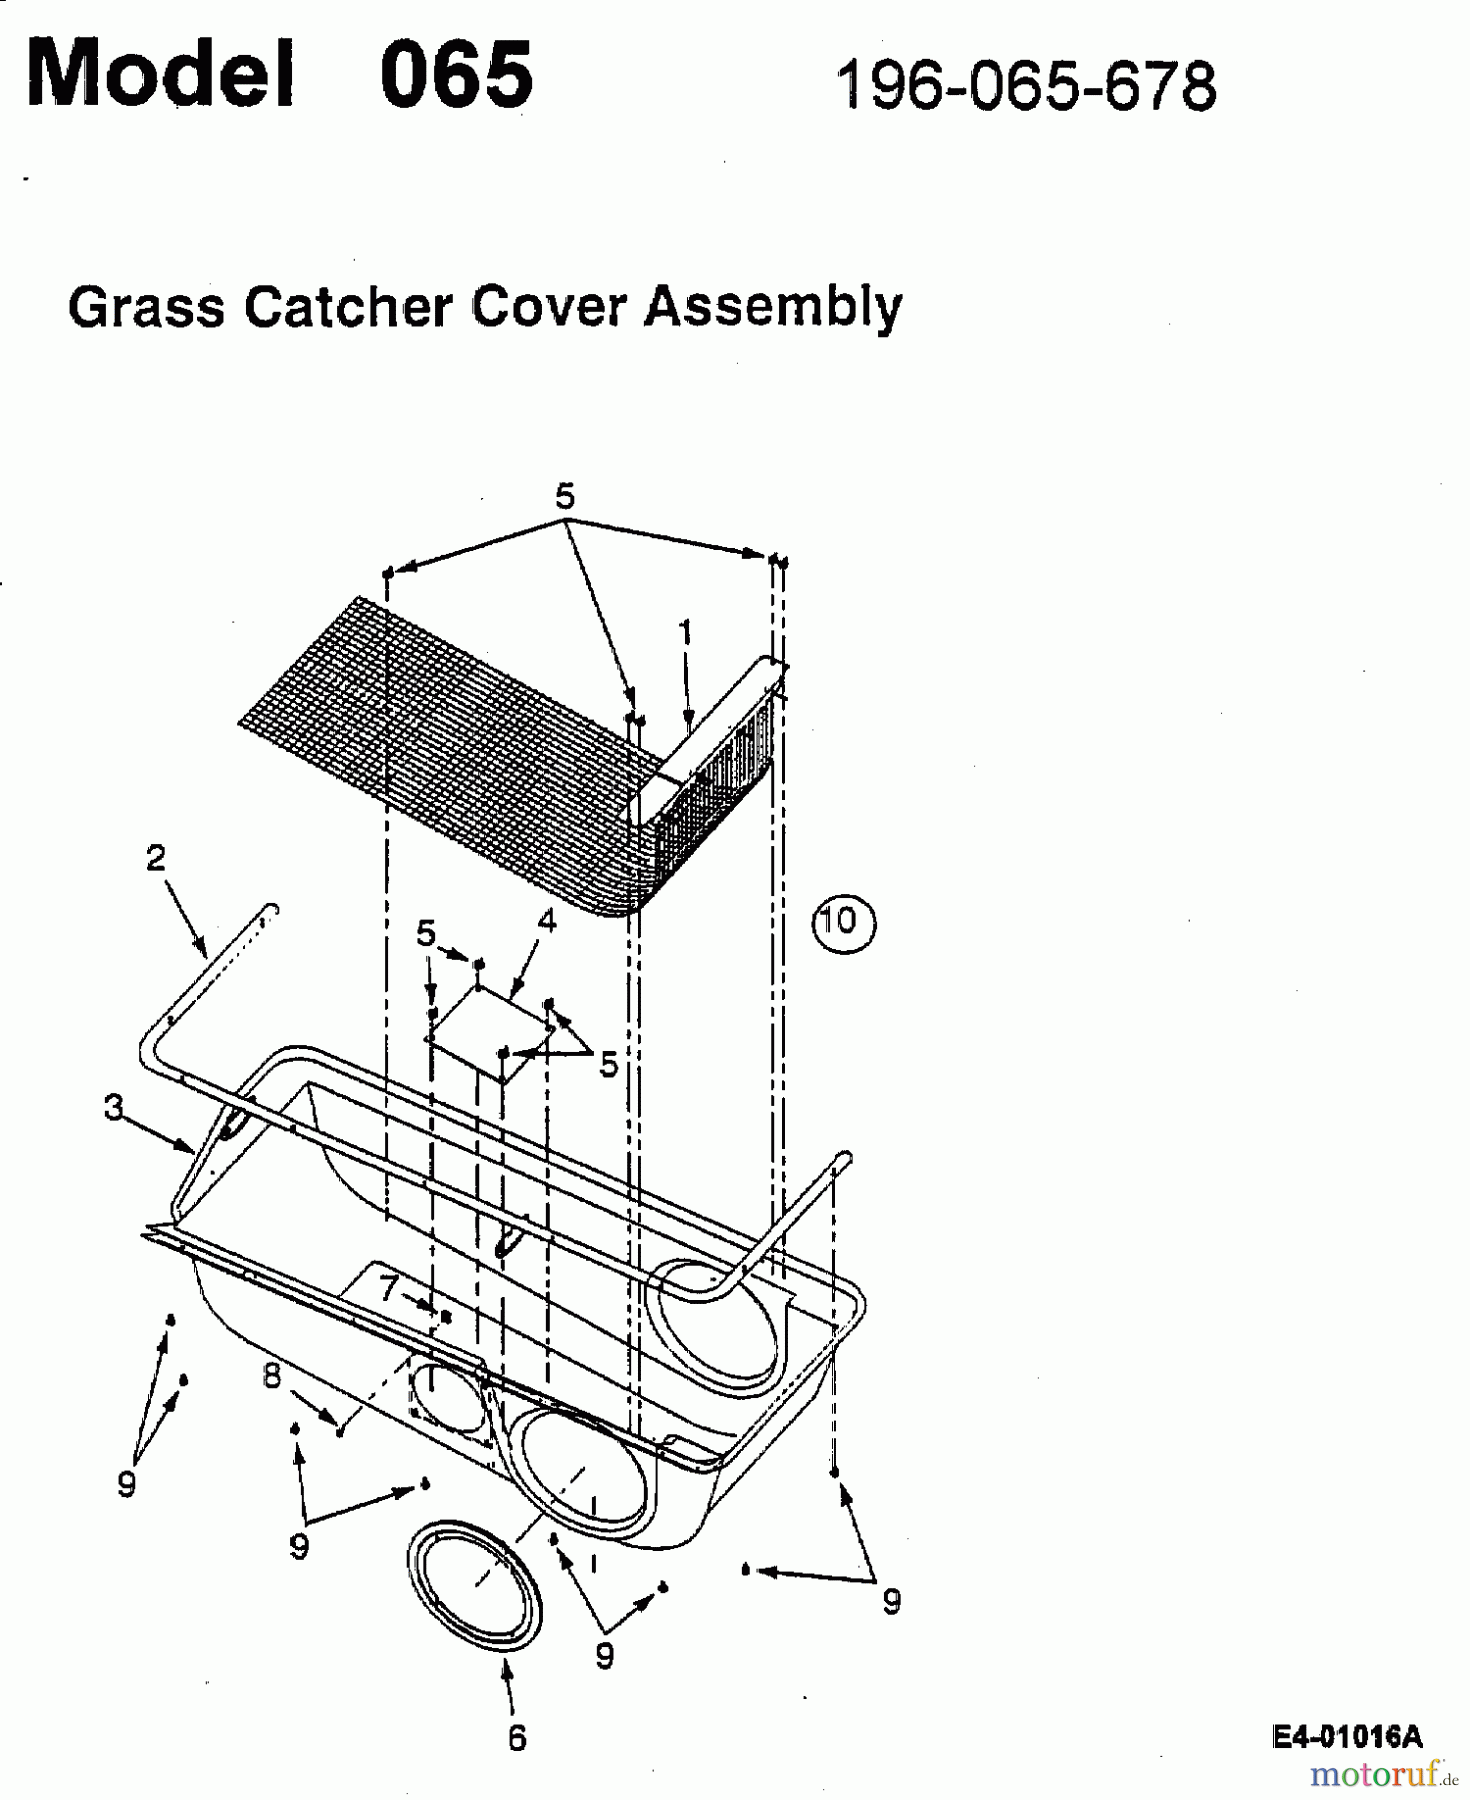  MTD Accessories Accessories garden and lawn tractors Grass catcher for 400 series 190-065-678  (1998) Cover grass bag